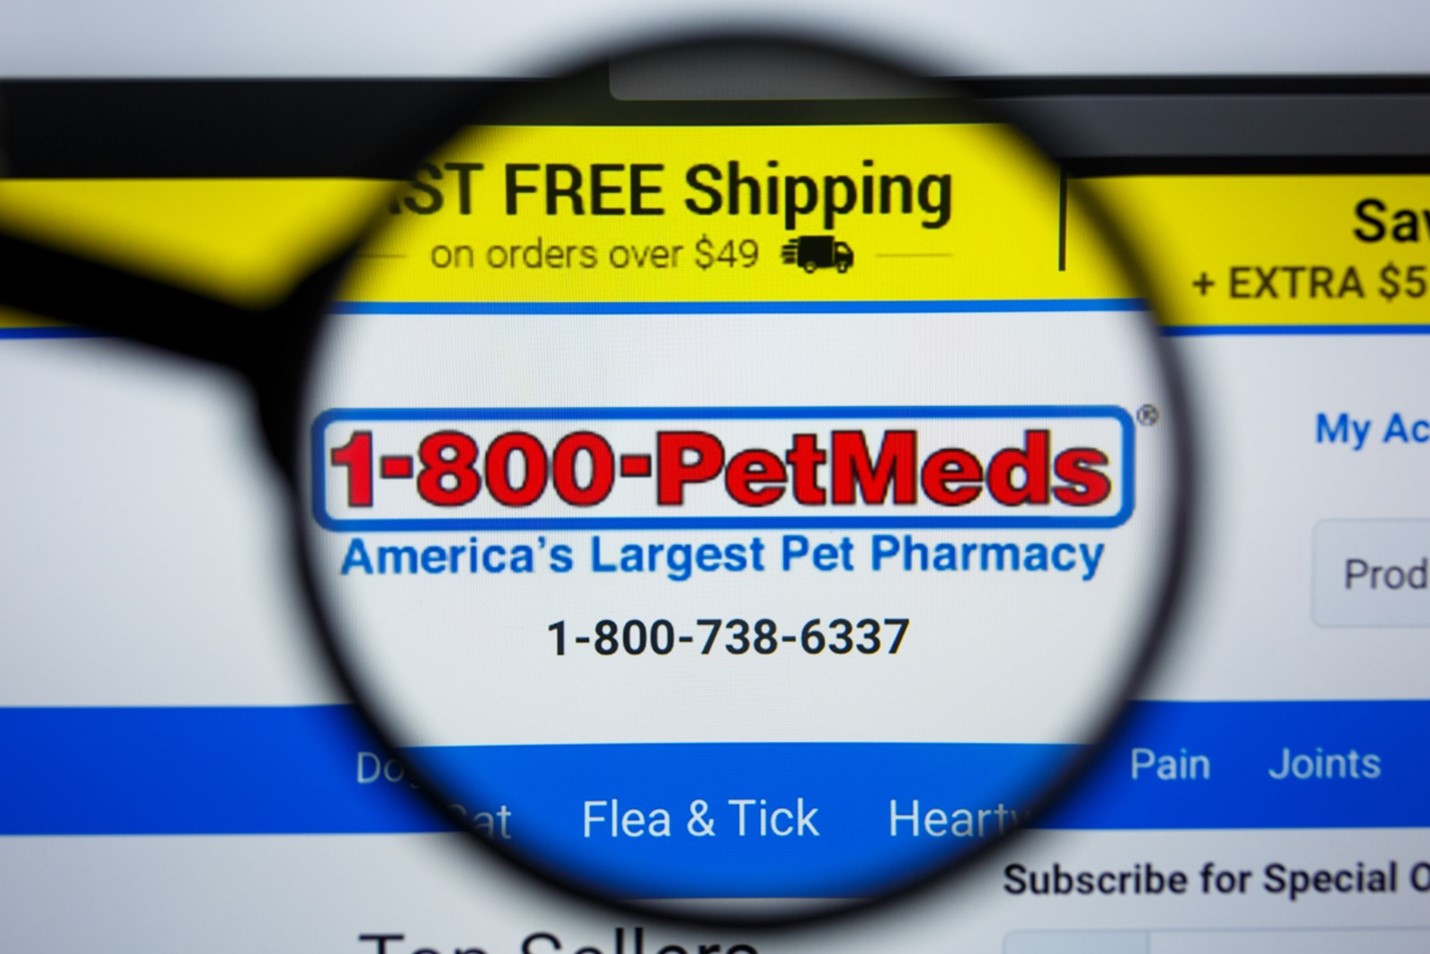 A magnifying glass demonstrates a close-up magnification of the business, PetMed Express, Inc.'s, toll-free phone number, 1-800-PETMEDS.